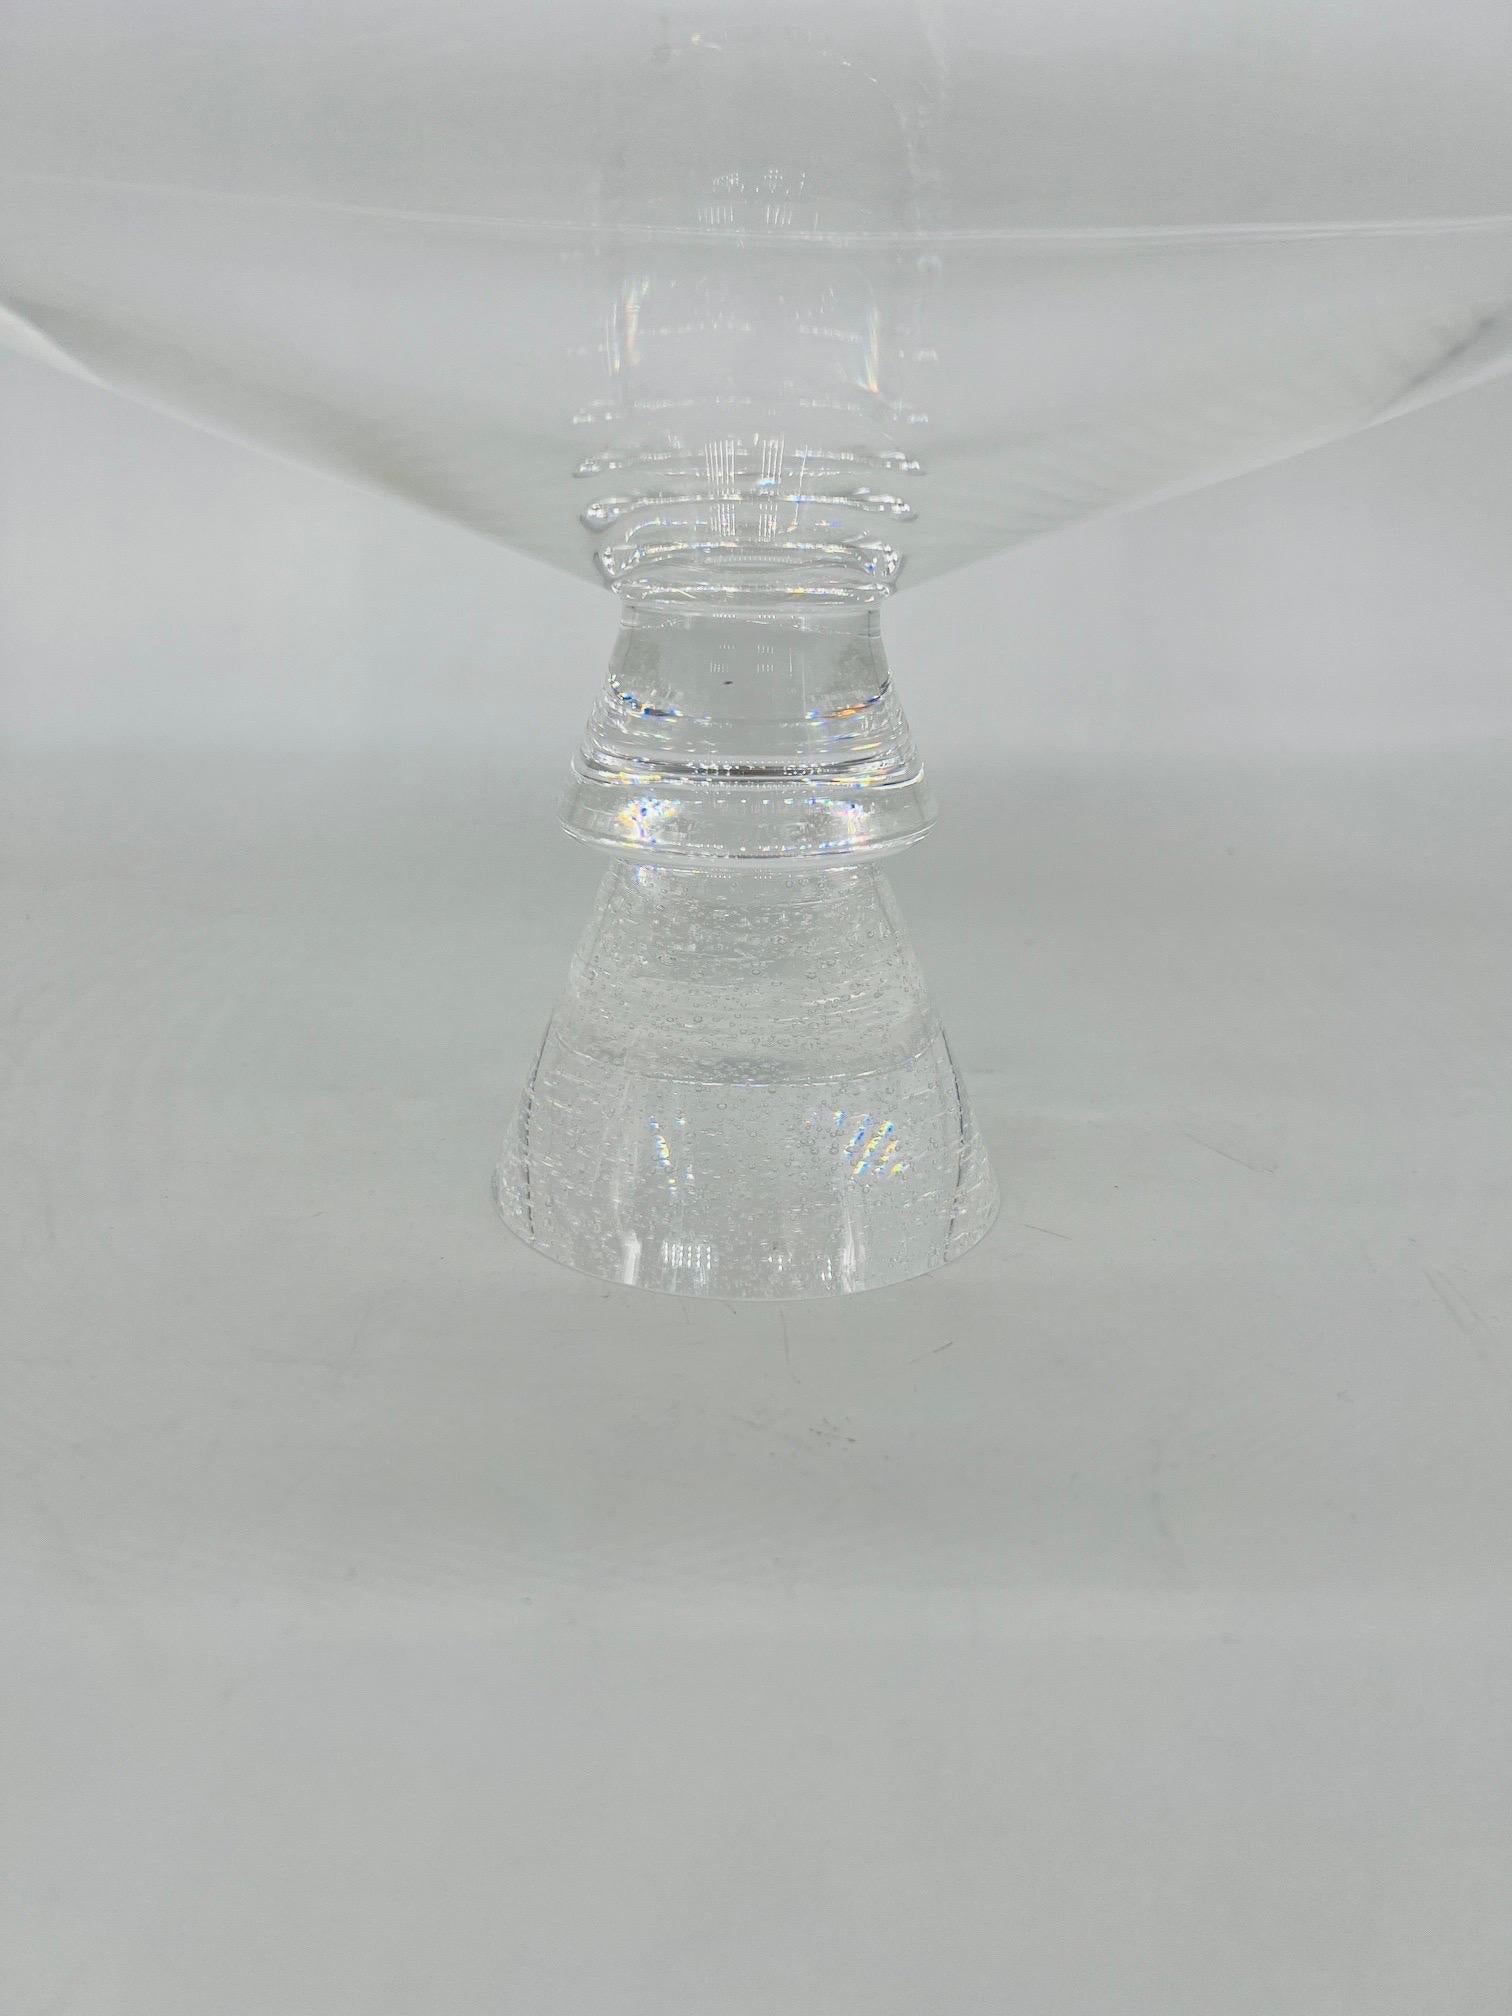 Crystal David Dowler for Steuben “Stardust” Pattern Centerpiece Bowl or Tazza circa 1985 For Sale